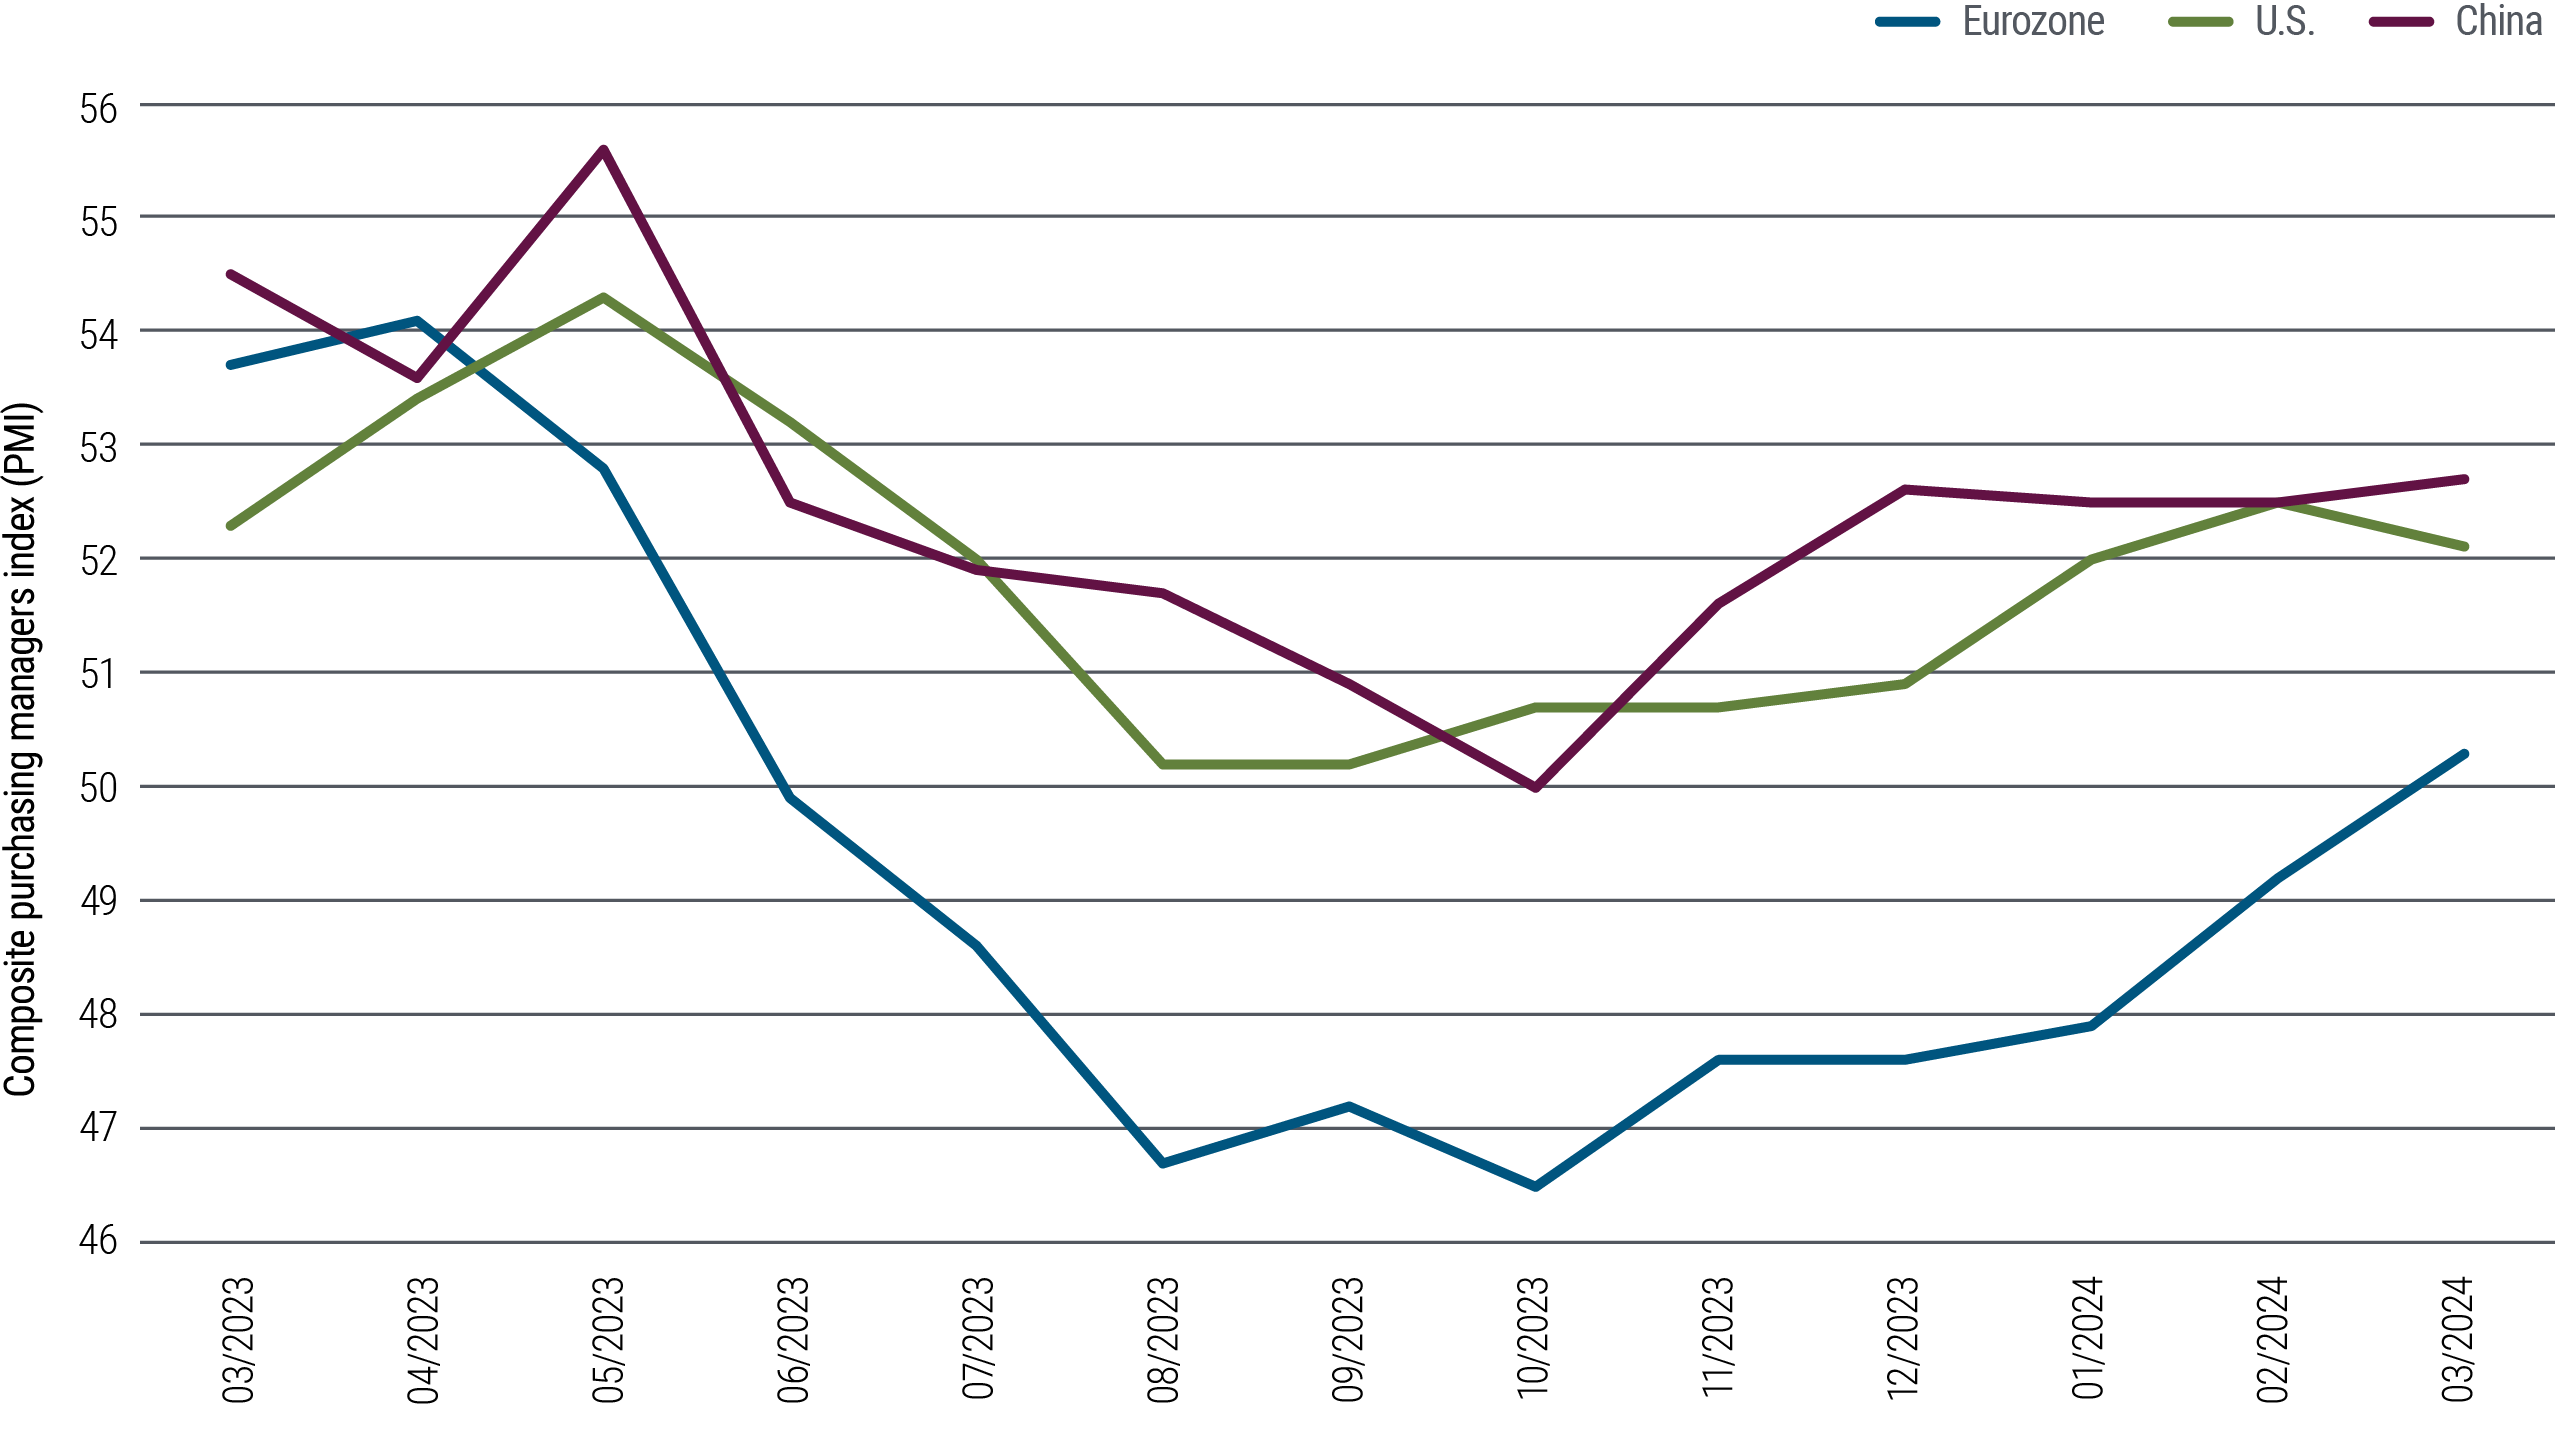 Figure 1 is a line chart showing composite purchasing managers indices for the U.S., China, and eurozone with monthly data from March 2023 through March 2024. In that time frame, all indices peaked in April or May 2023, then fell to lows in the third quarter before rising again. As of March 2024, China PMI stood at 52.7, U.S. at 52.1, and eurozone (which had bottomed considerably lower than the other two in 2023) at 50.3.